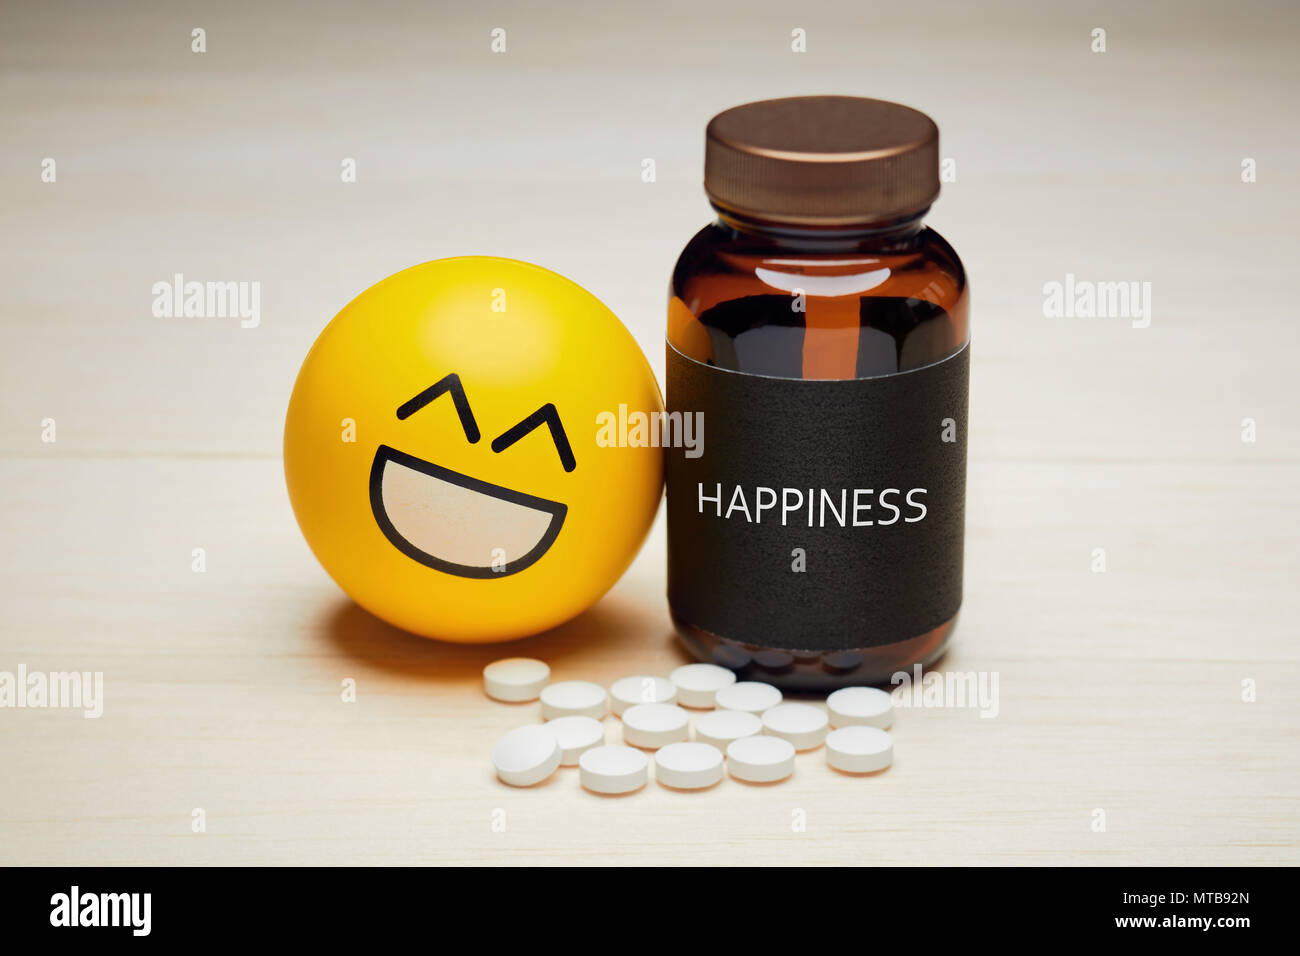 Anti depressant drug use and happiness concept. Yellow smiling emoji reclined to a drug container with a black label written happiness on it. Heap of  Stock Photo